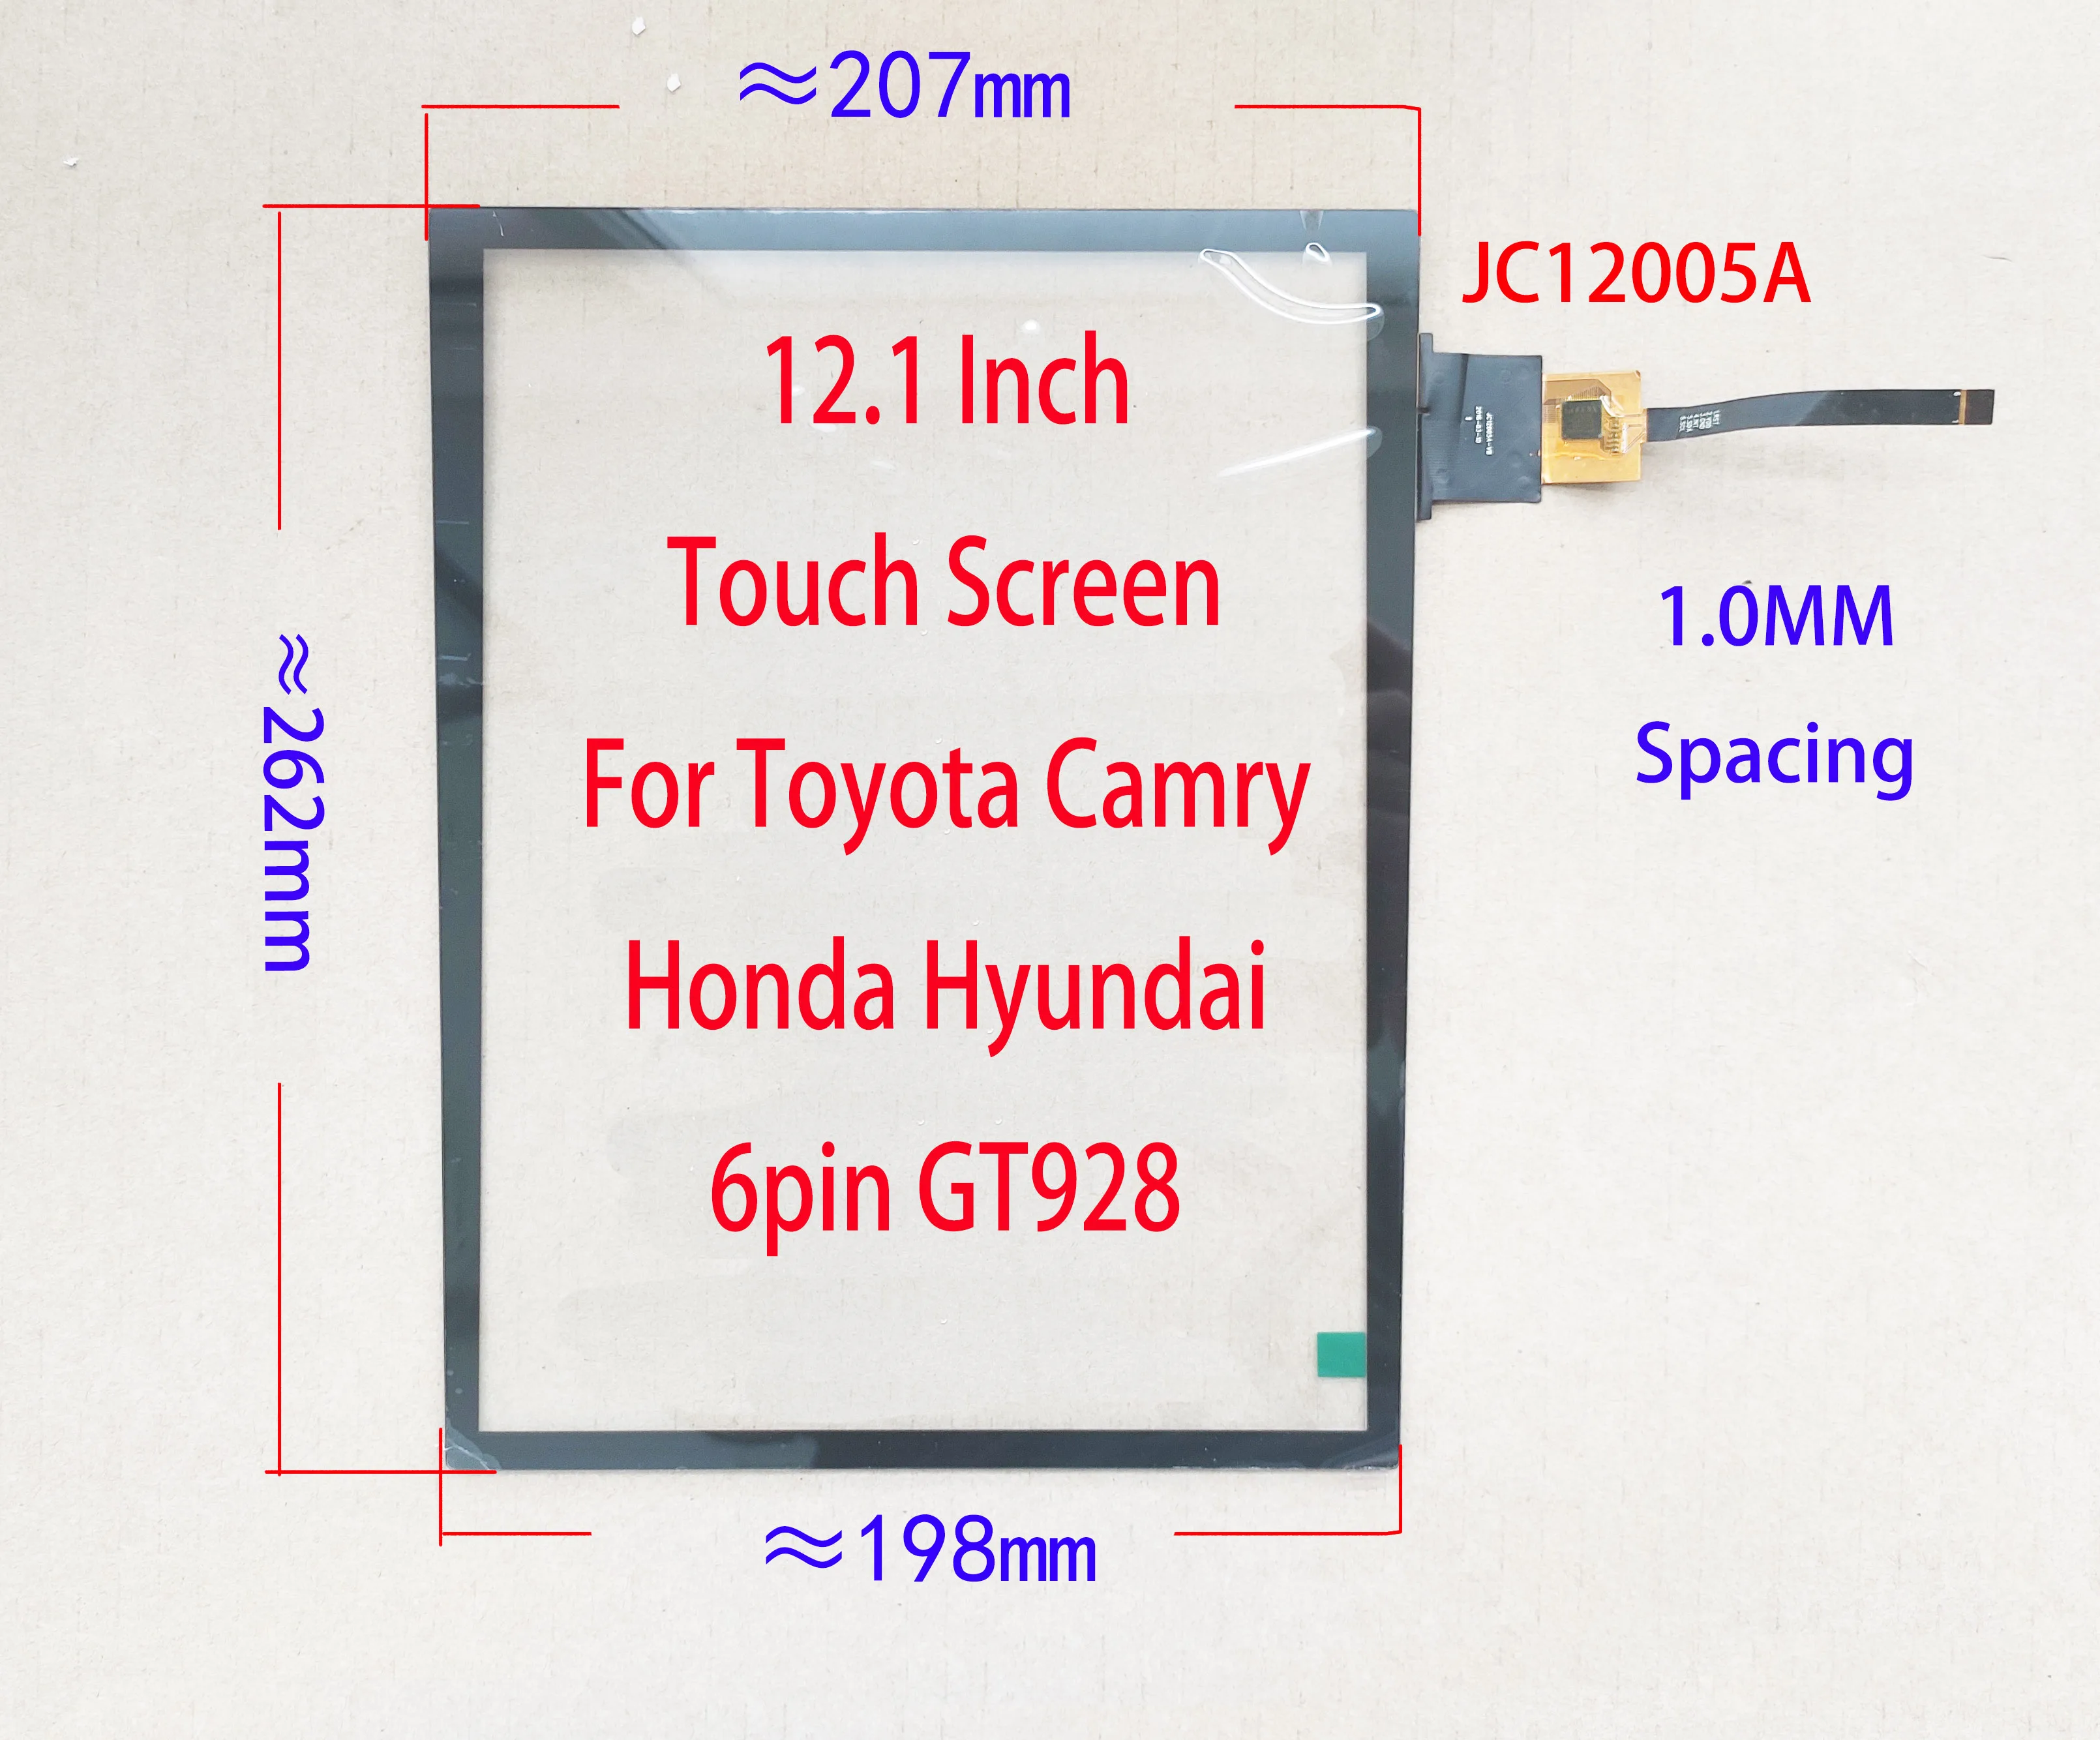 12.1 Inch Capacitive Touch Screen Sensor Digitizer Tesla Style For Toyota Camry GT928 6Pin 207mm(198mm)*262mm